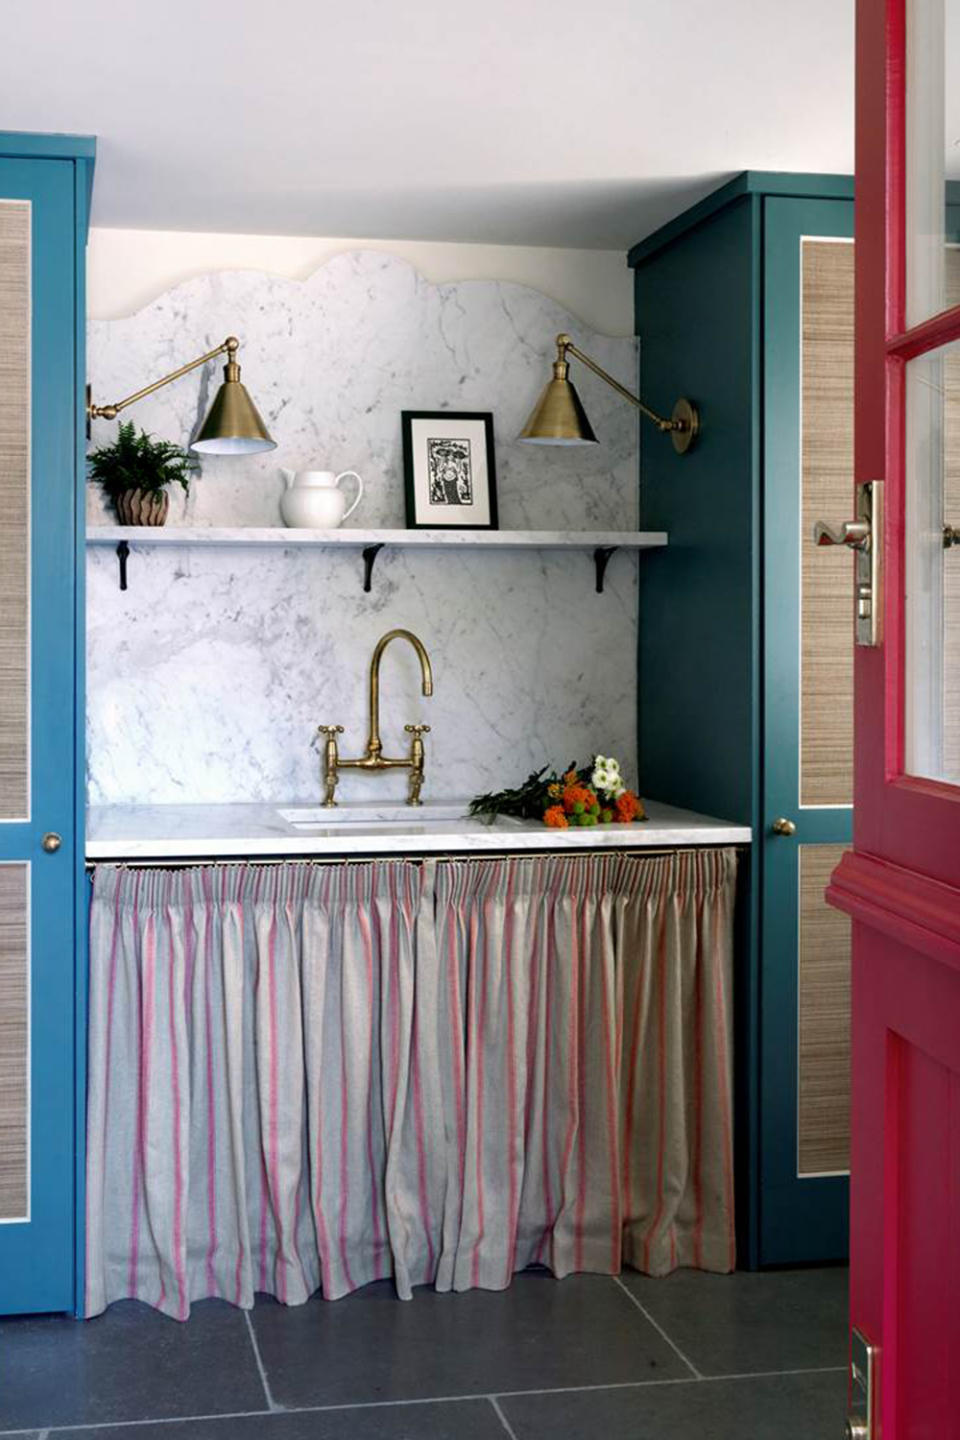 <p> Once considered outdated and frumpy, the sink skirt is back in fashion creating opportunity for texture and pattern, softening kitchen schemes and adding a touch of nostalgia.&#xA0; </p> <p> The idea is based around replacing the base cabinet doors underneath the sink with pleated curtains, often suspended on a decorative rod. Here is an opportunity for an element that can be updated often &#x2013; on trend gingham, tactile untreated linen or pale pink stripes amongst bold colors like&#xA0;Beata Heuman. </p>